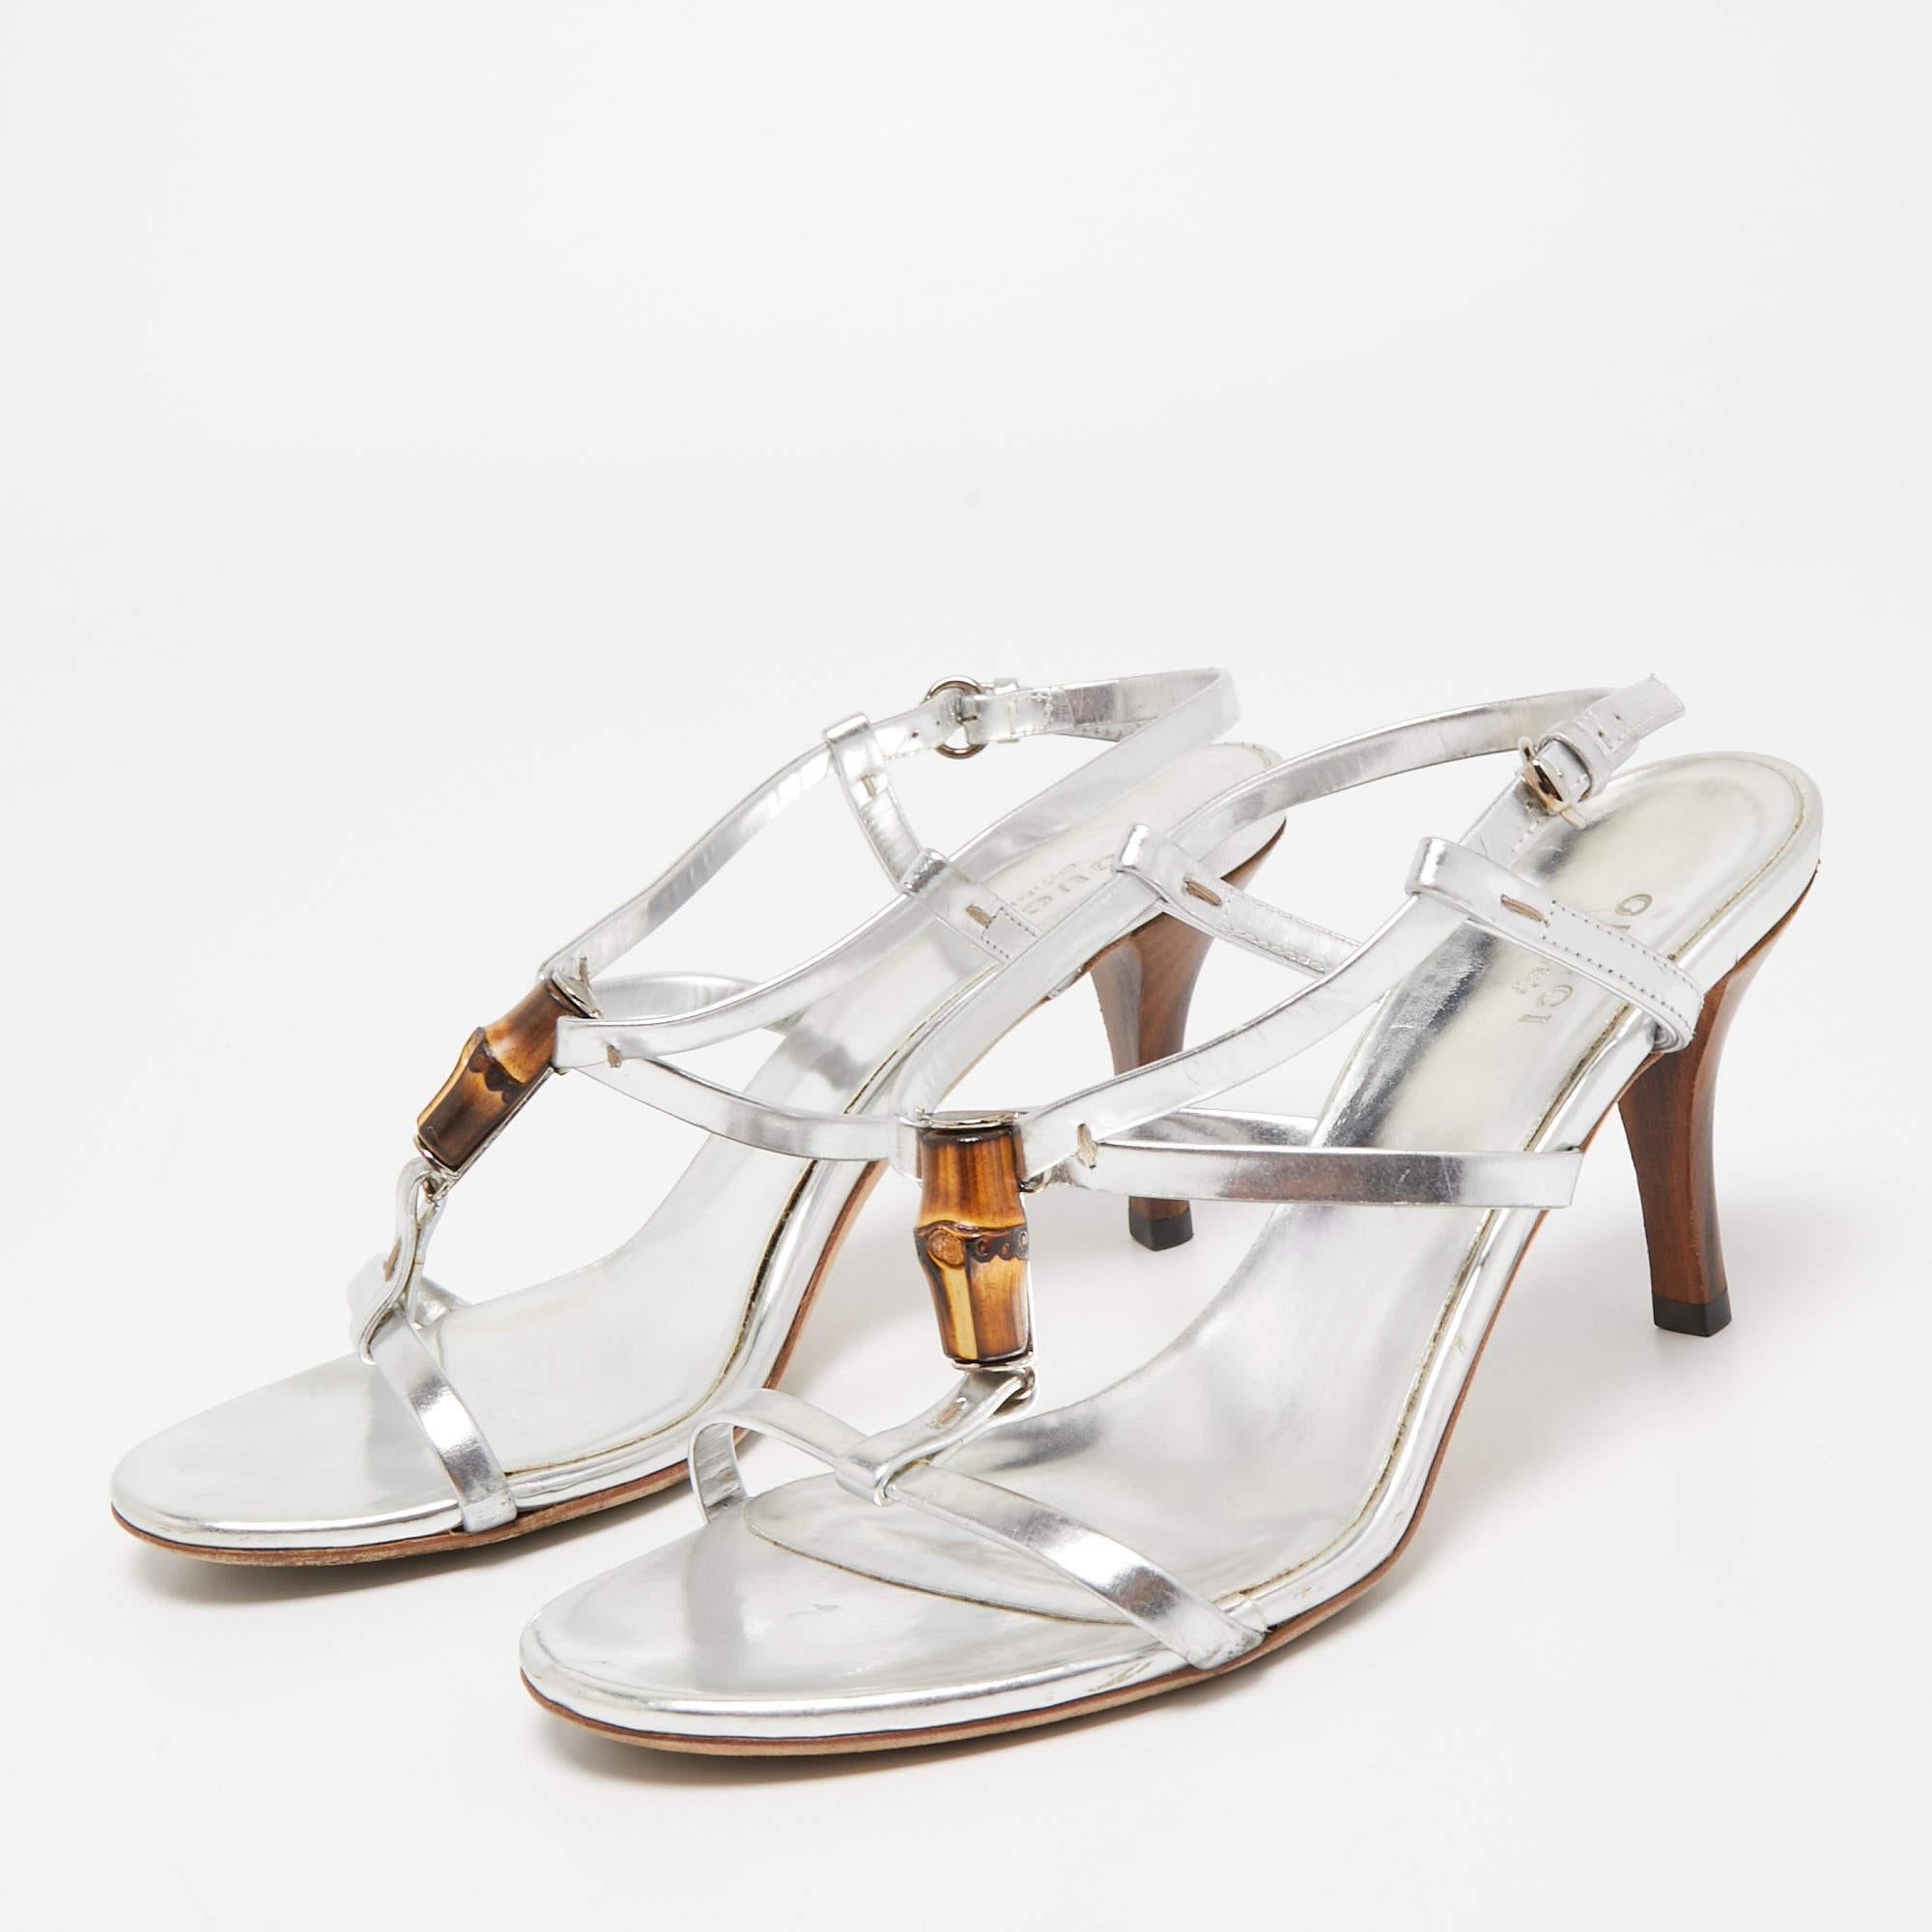 These sandals are chic and constructed with care for a great fit. Crafted from quality materials, they are durable, easy to style, and fabulous, with comfortable interiors, artful designing, and beautiful uppers.


Includes
Original Dustbag